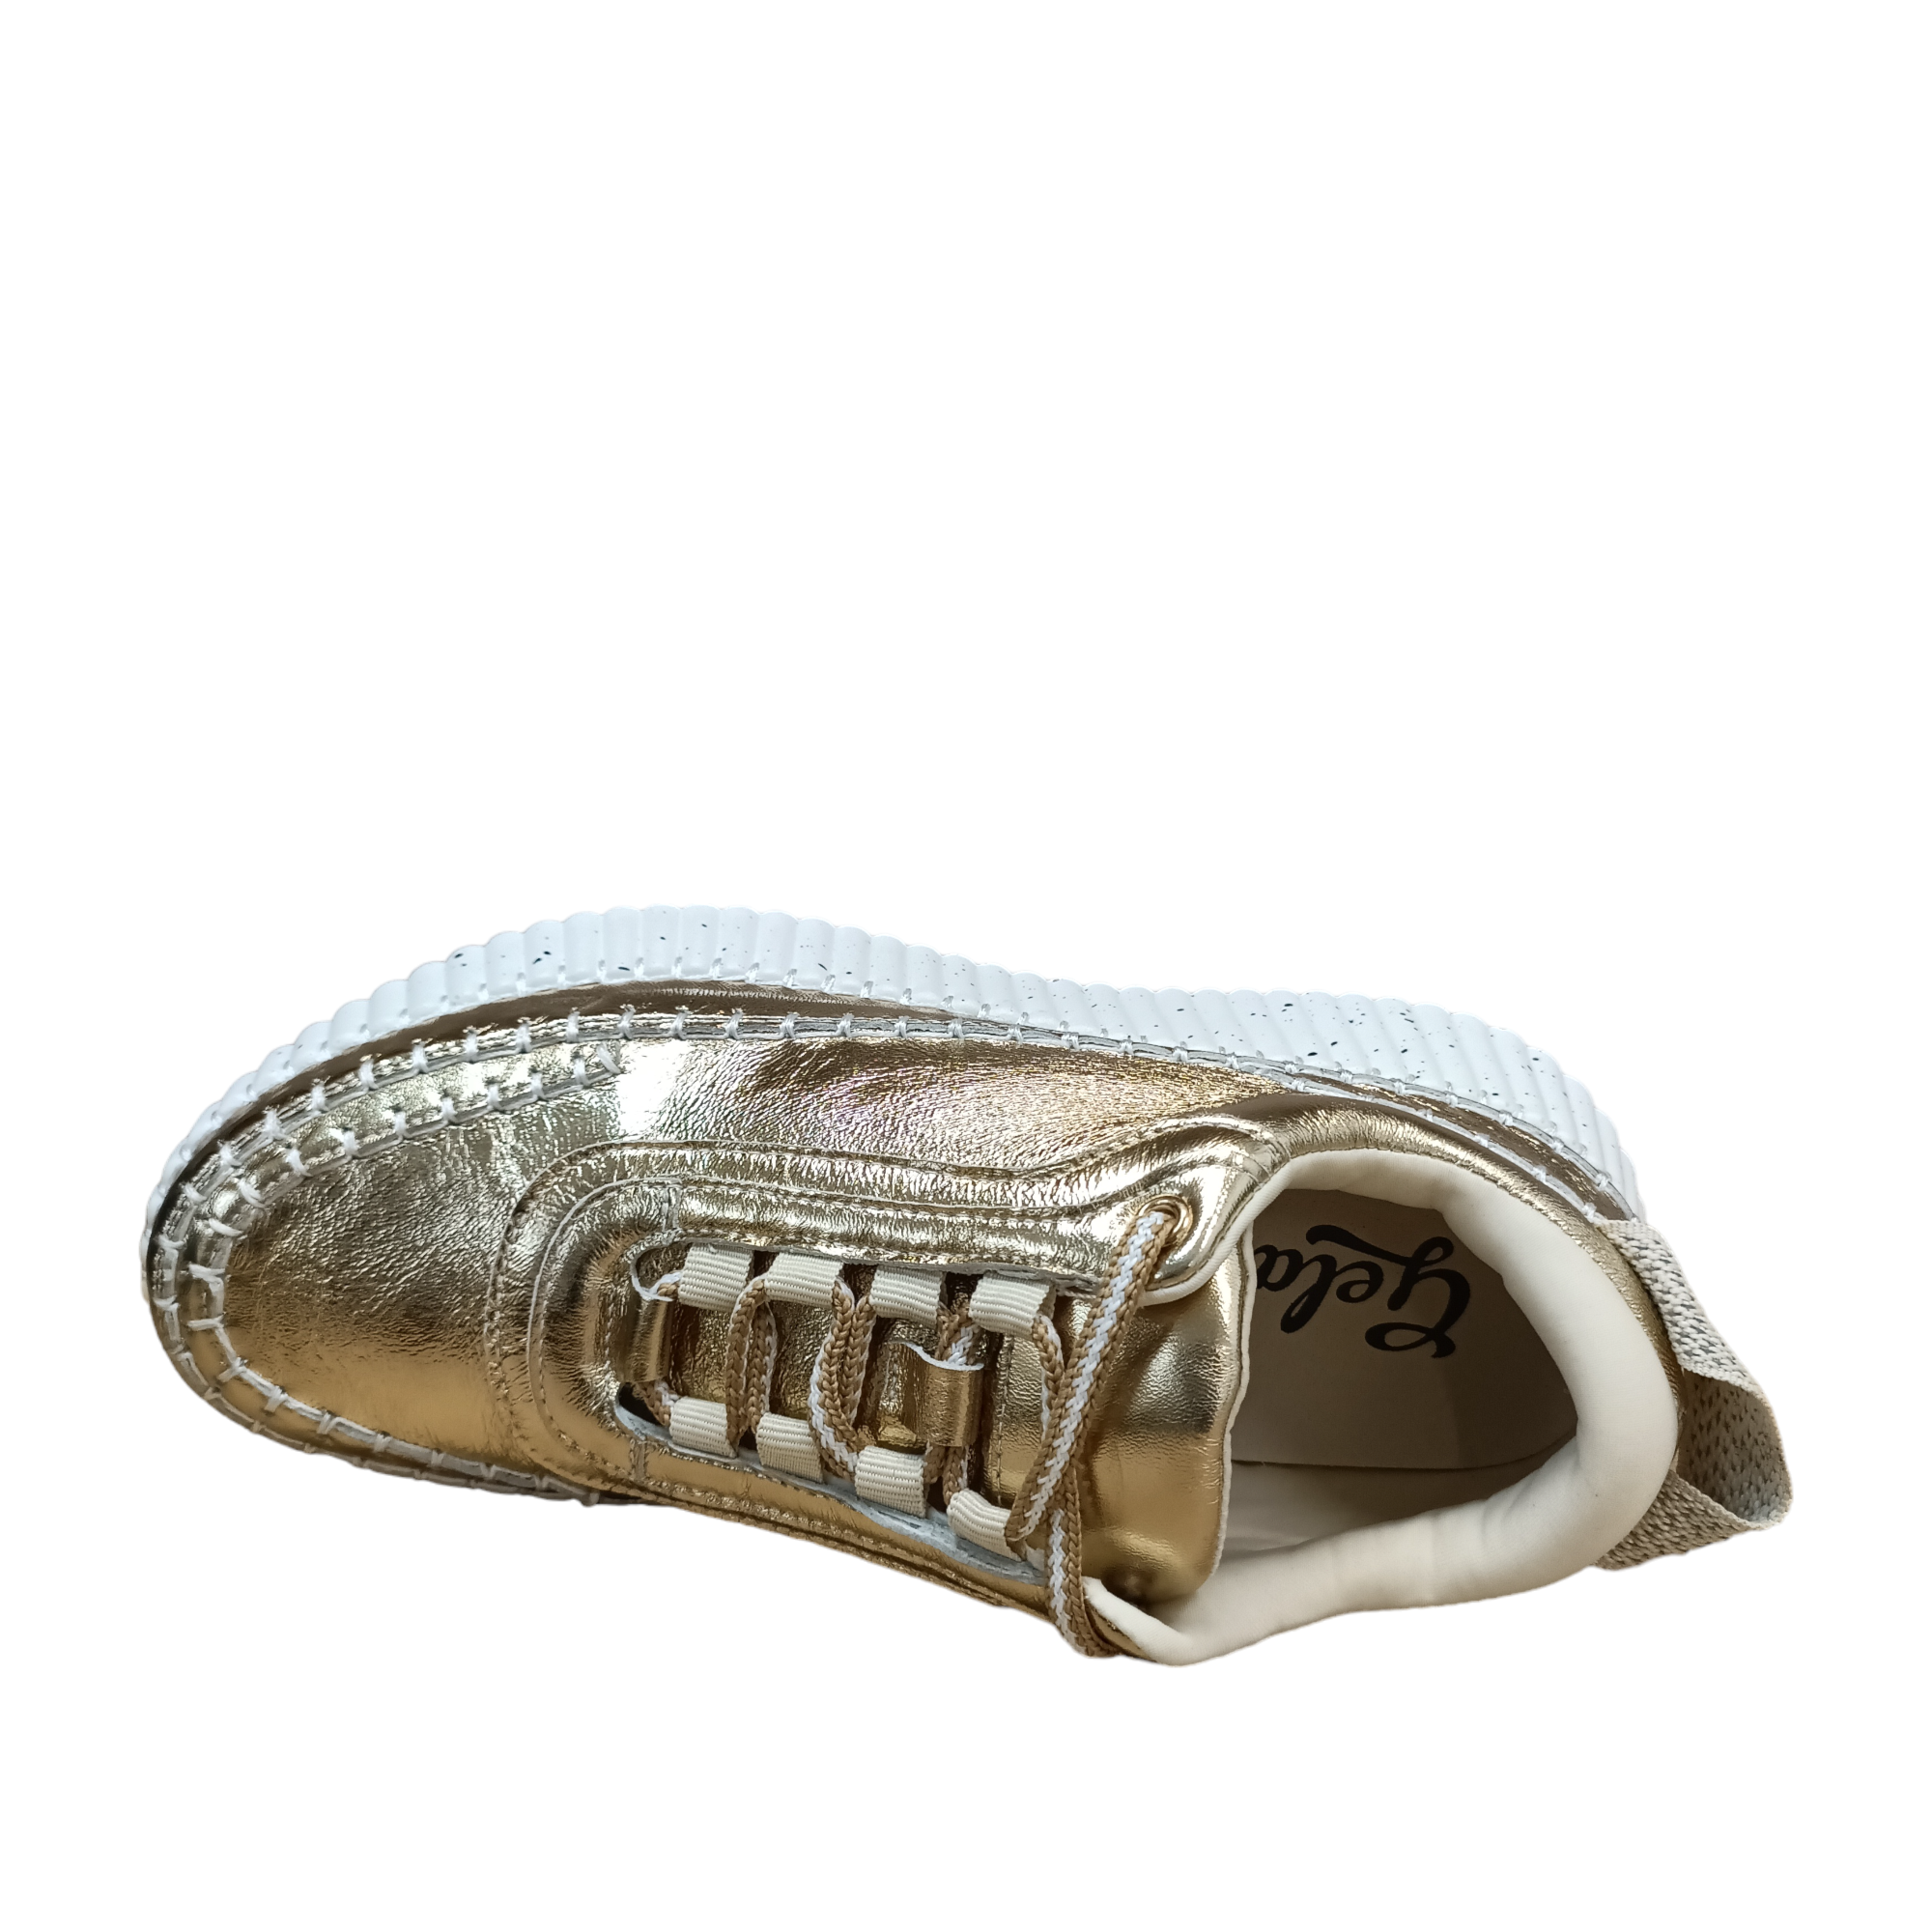 top view of a bright gold Gelato sneaker with a white speckled sole. shop womens winter sneakers shoe&amp;me NZ